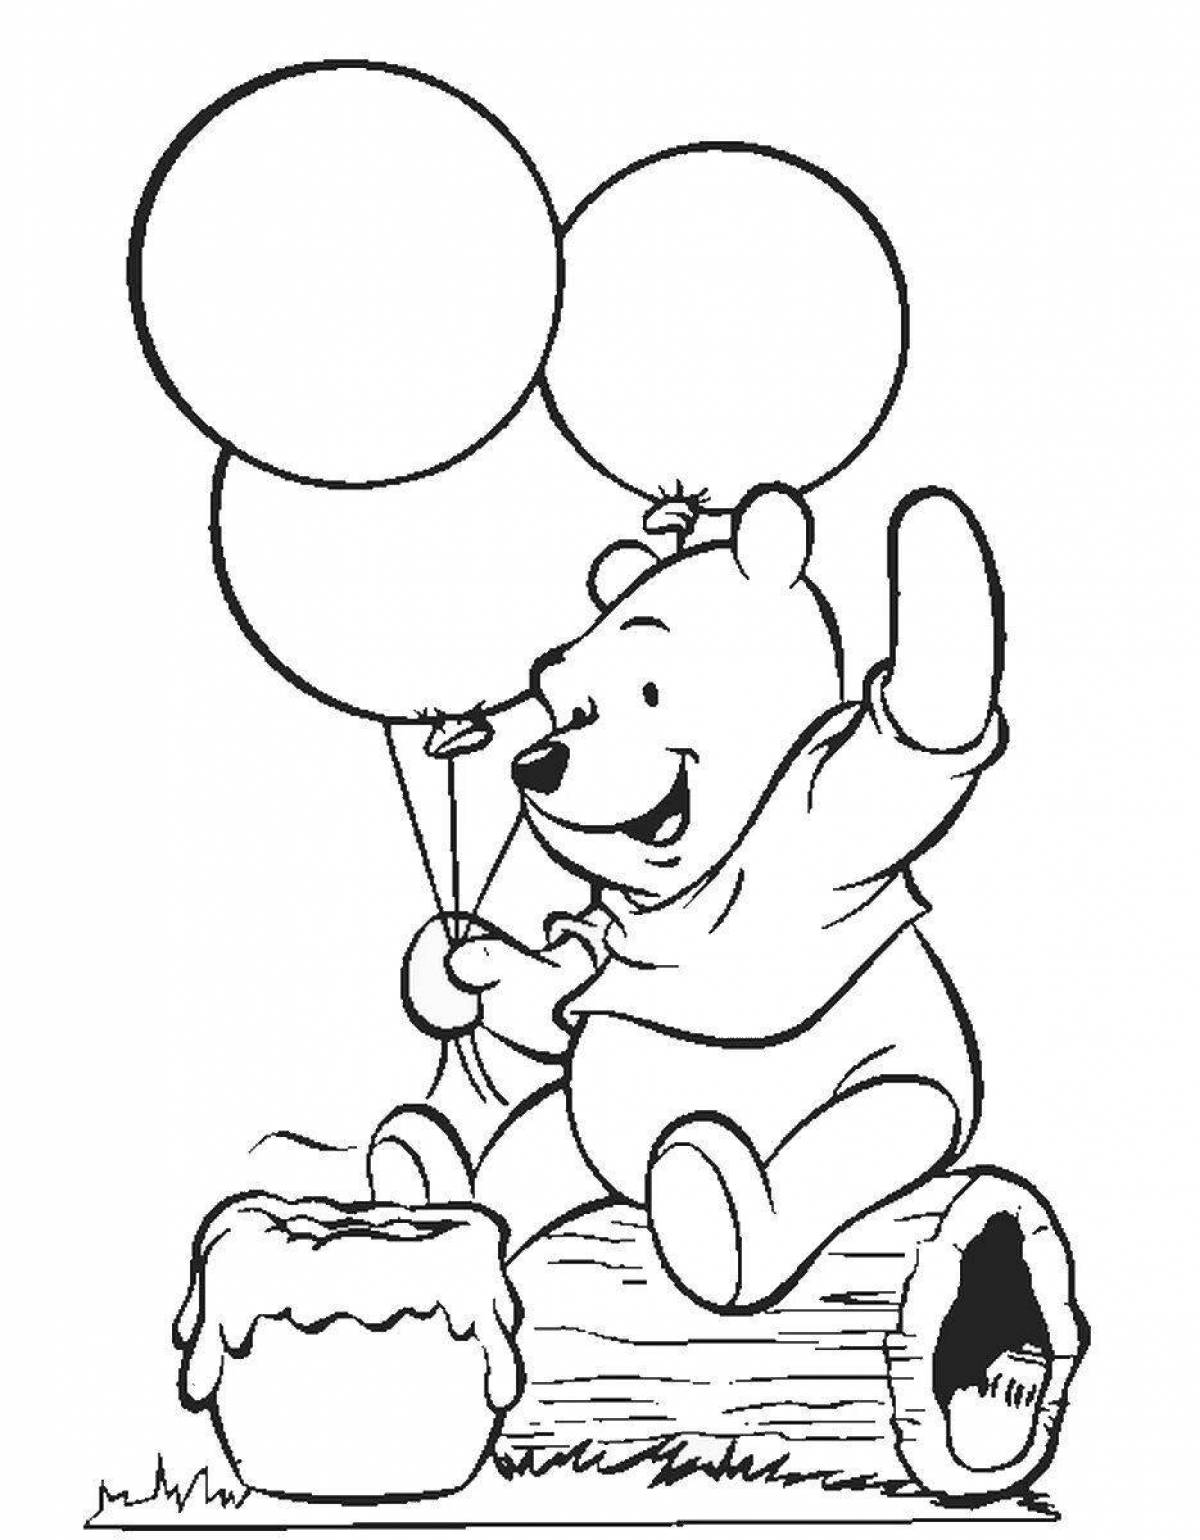 Winnie the pooh with balloon #10